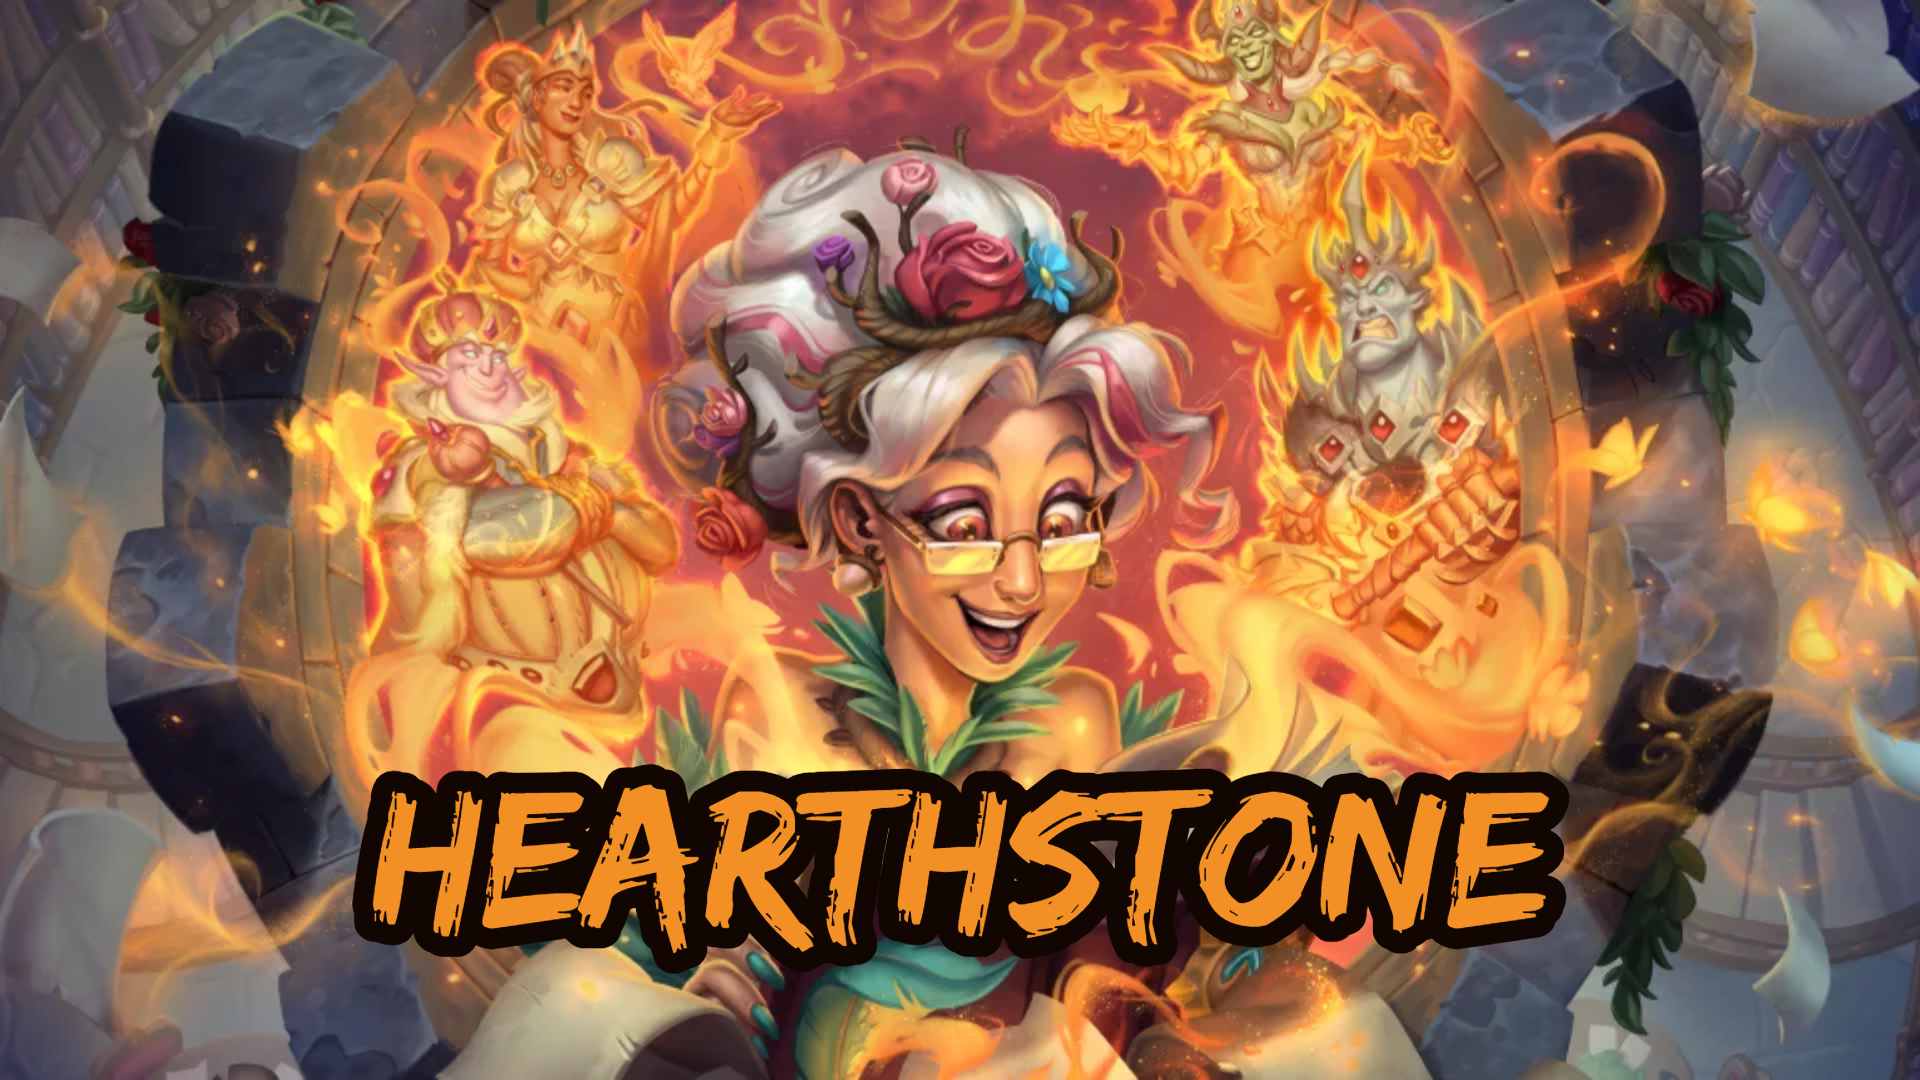 Hearthstone Season 7 Launches on April 16 Featuring New Co-Op Duos Mode image